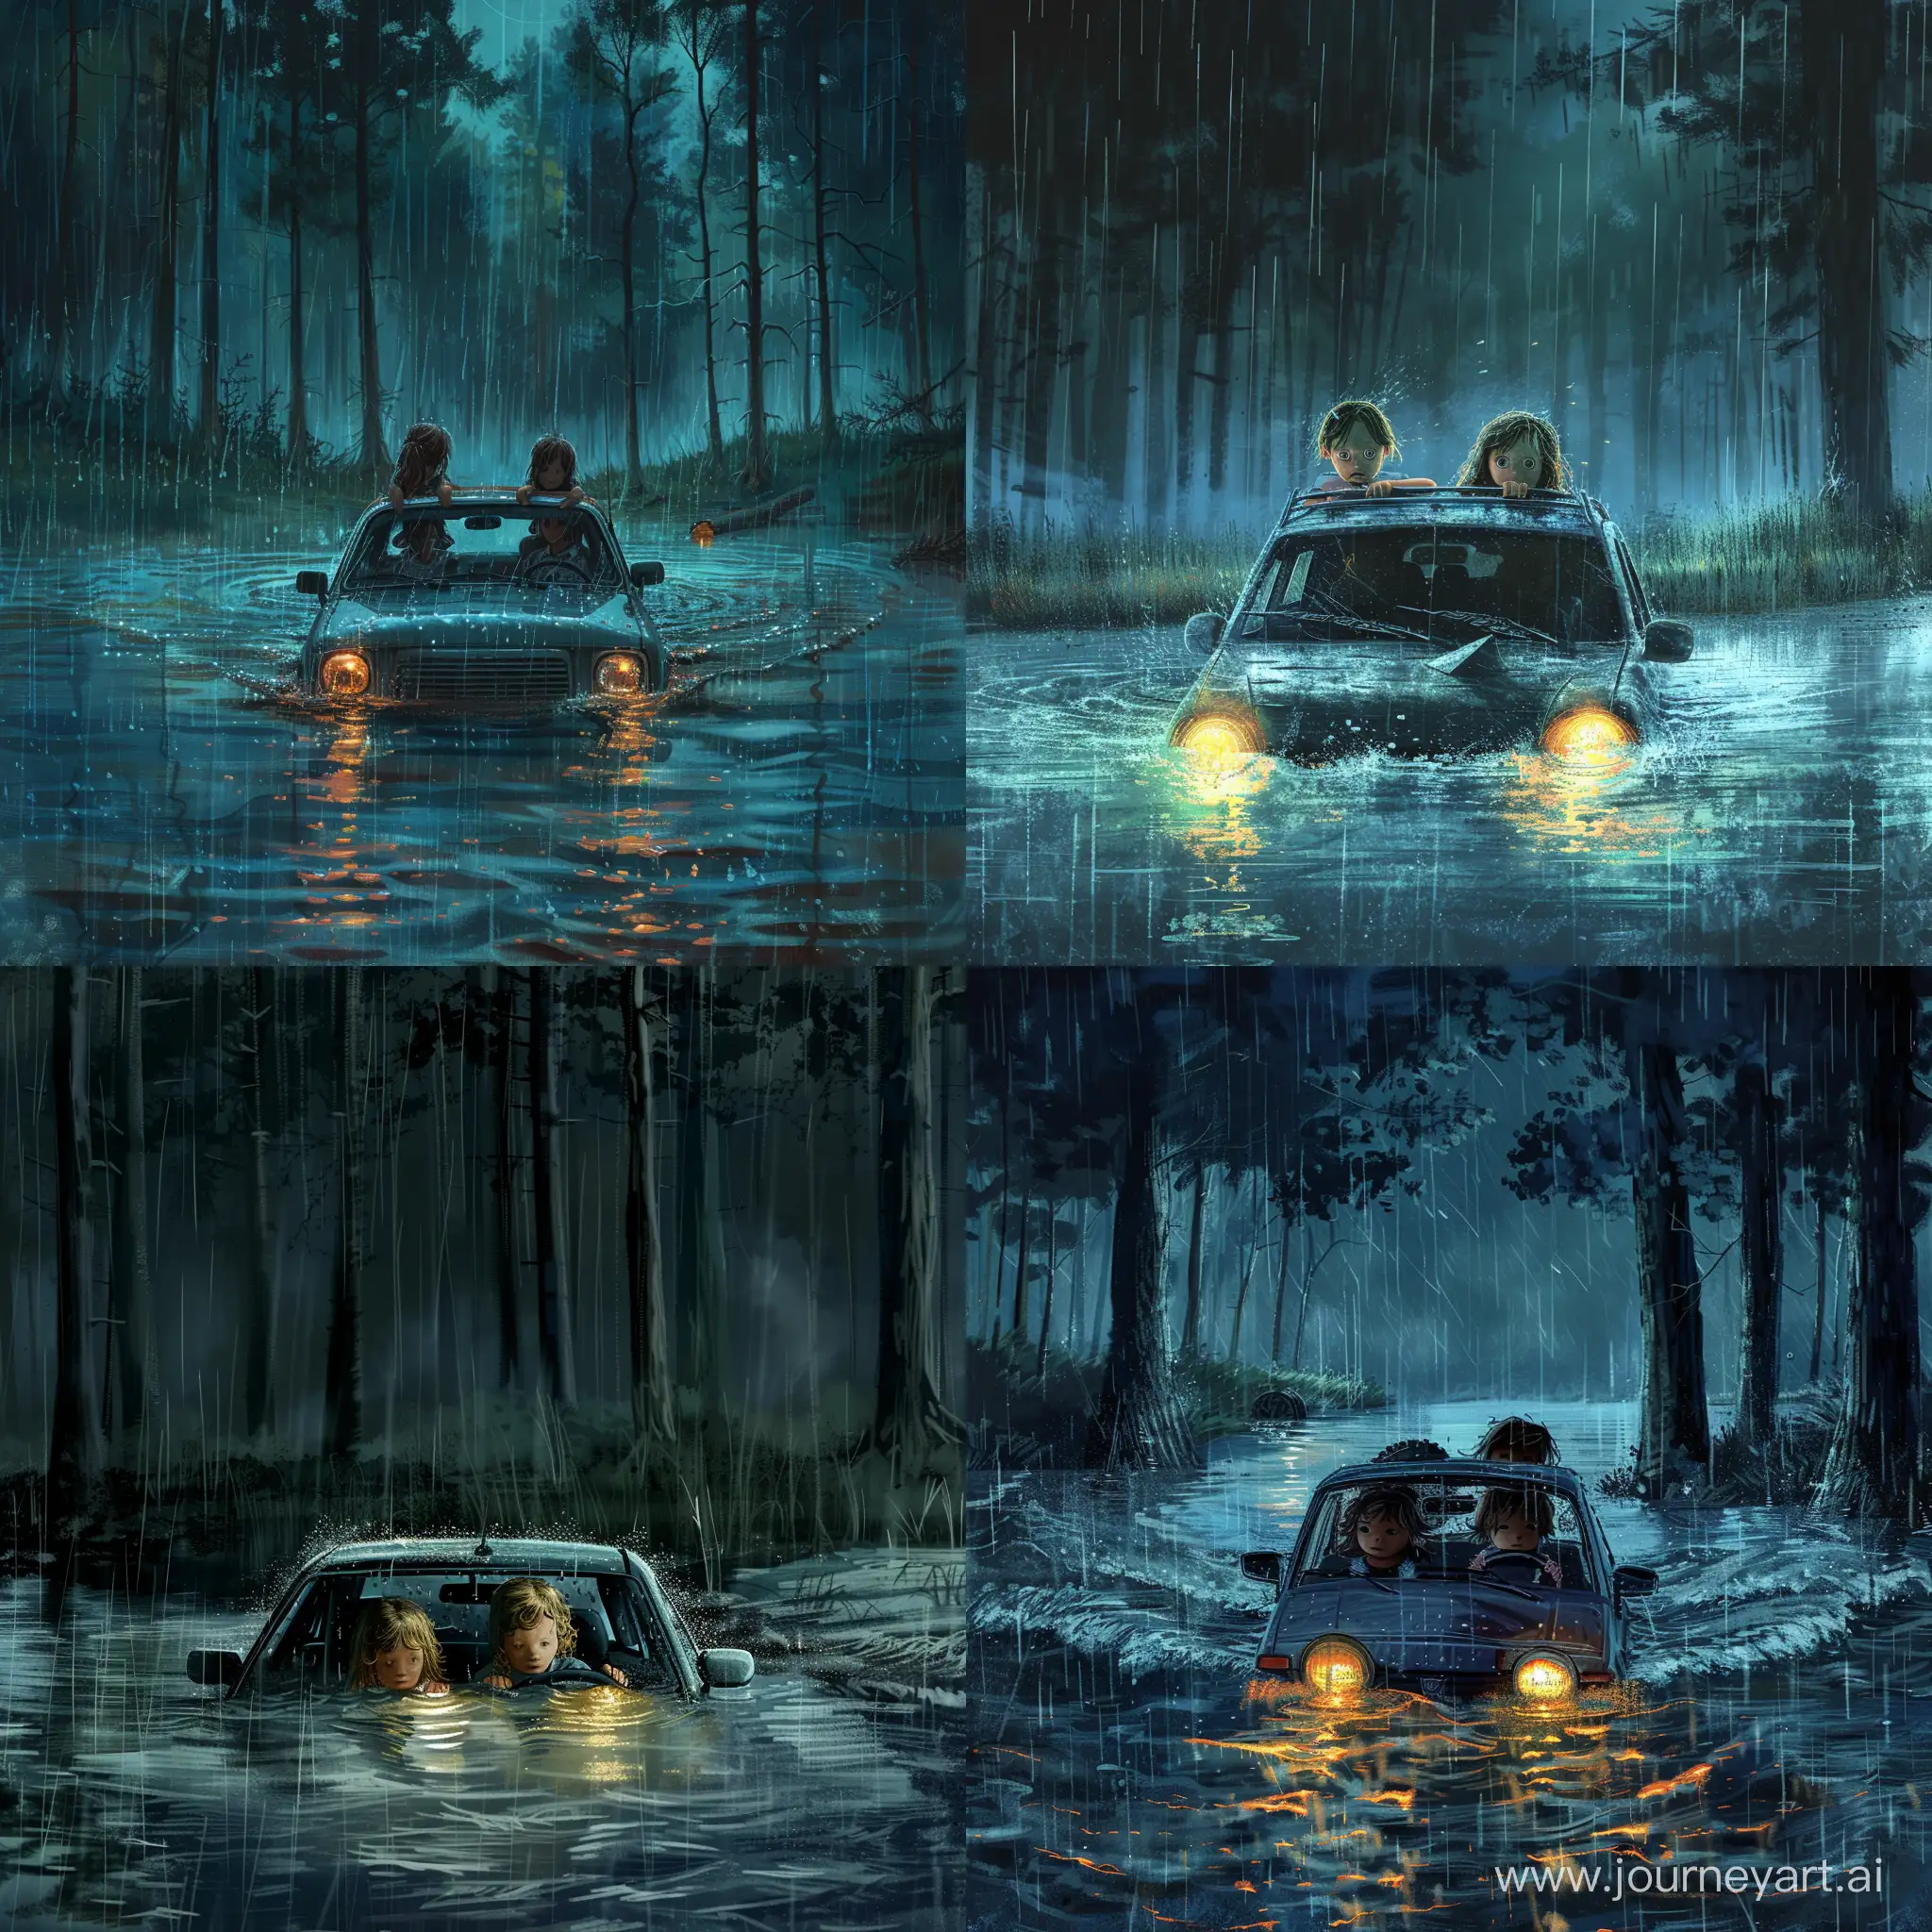 Two-Little-Girls-Driving-Car-into-Submerged-Lake-During-Heavy-Rain-at-Night